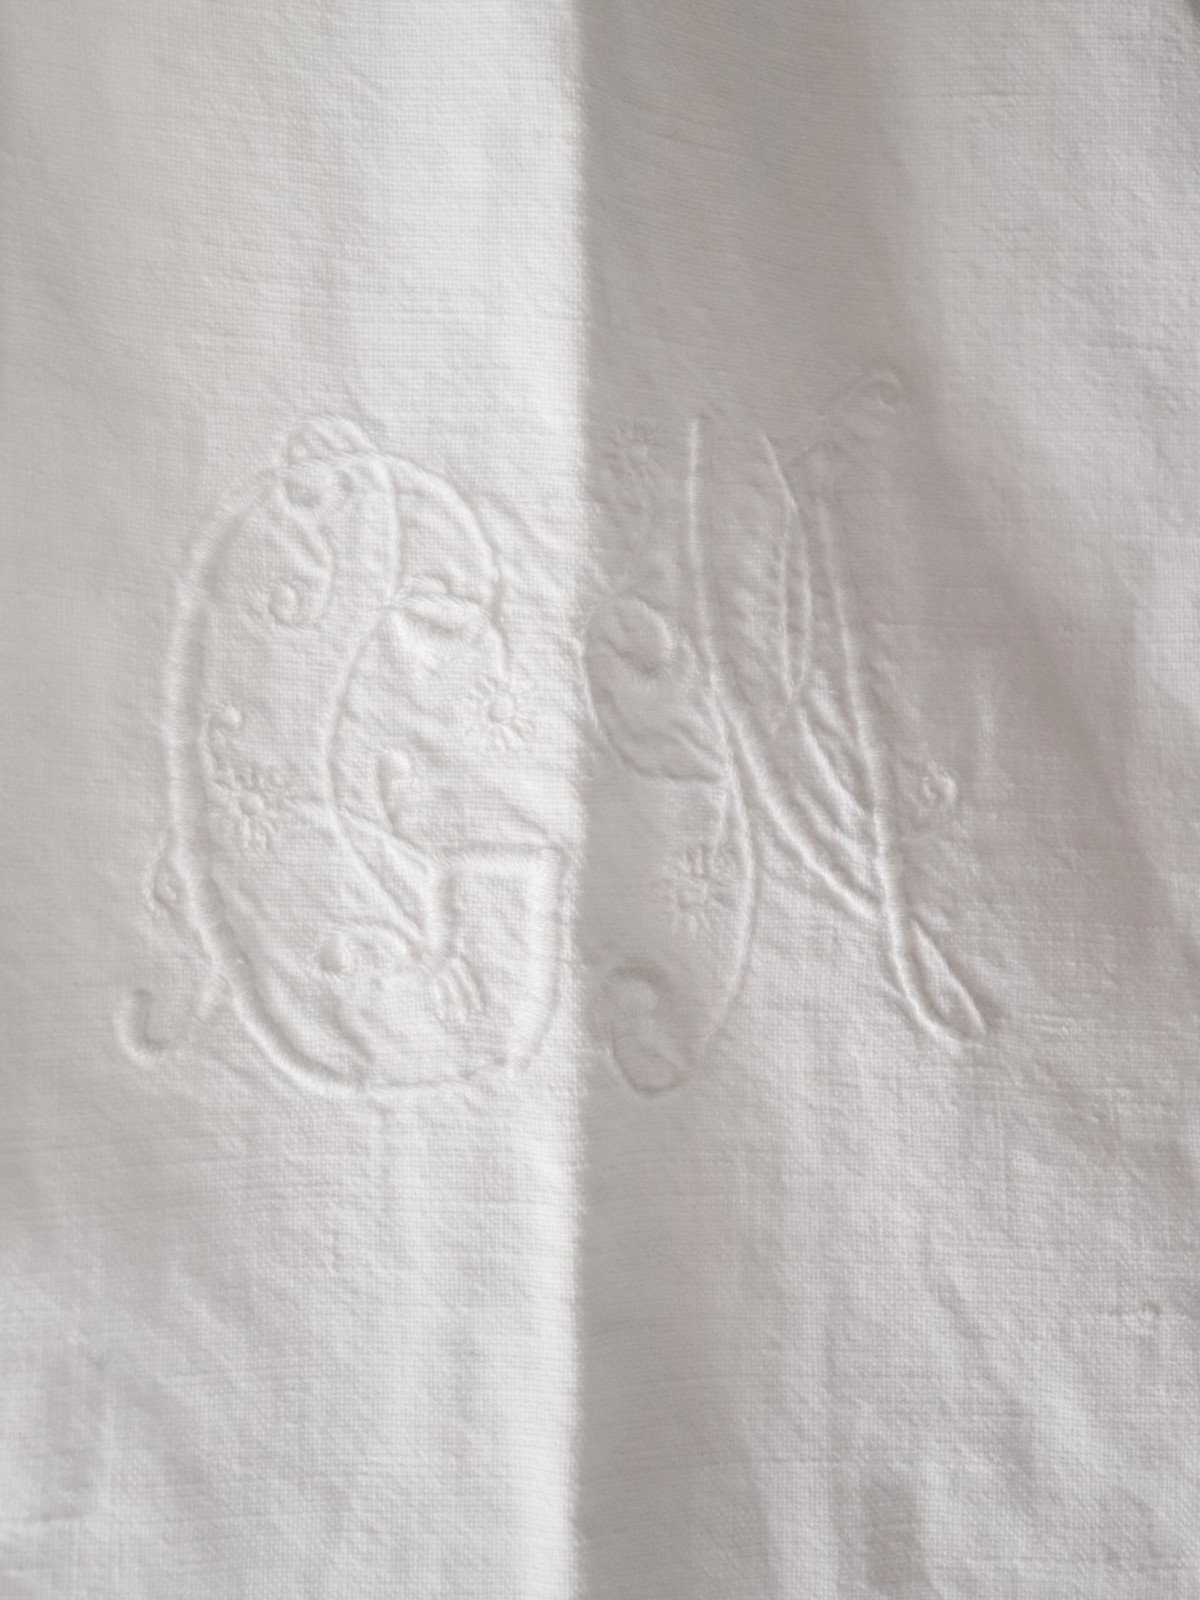 Vintage,linen,fabric,france,lace,embroidery,monogram